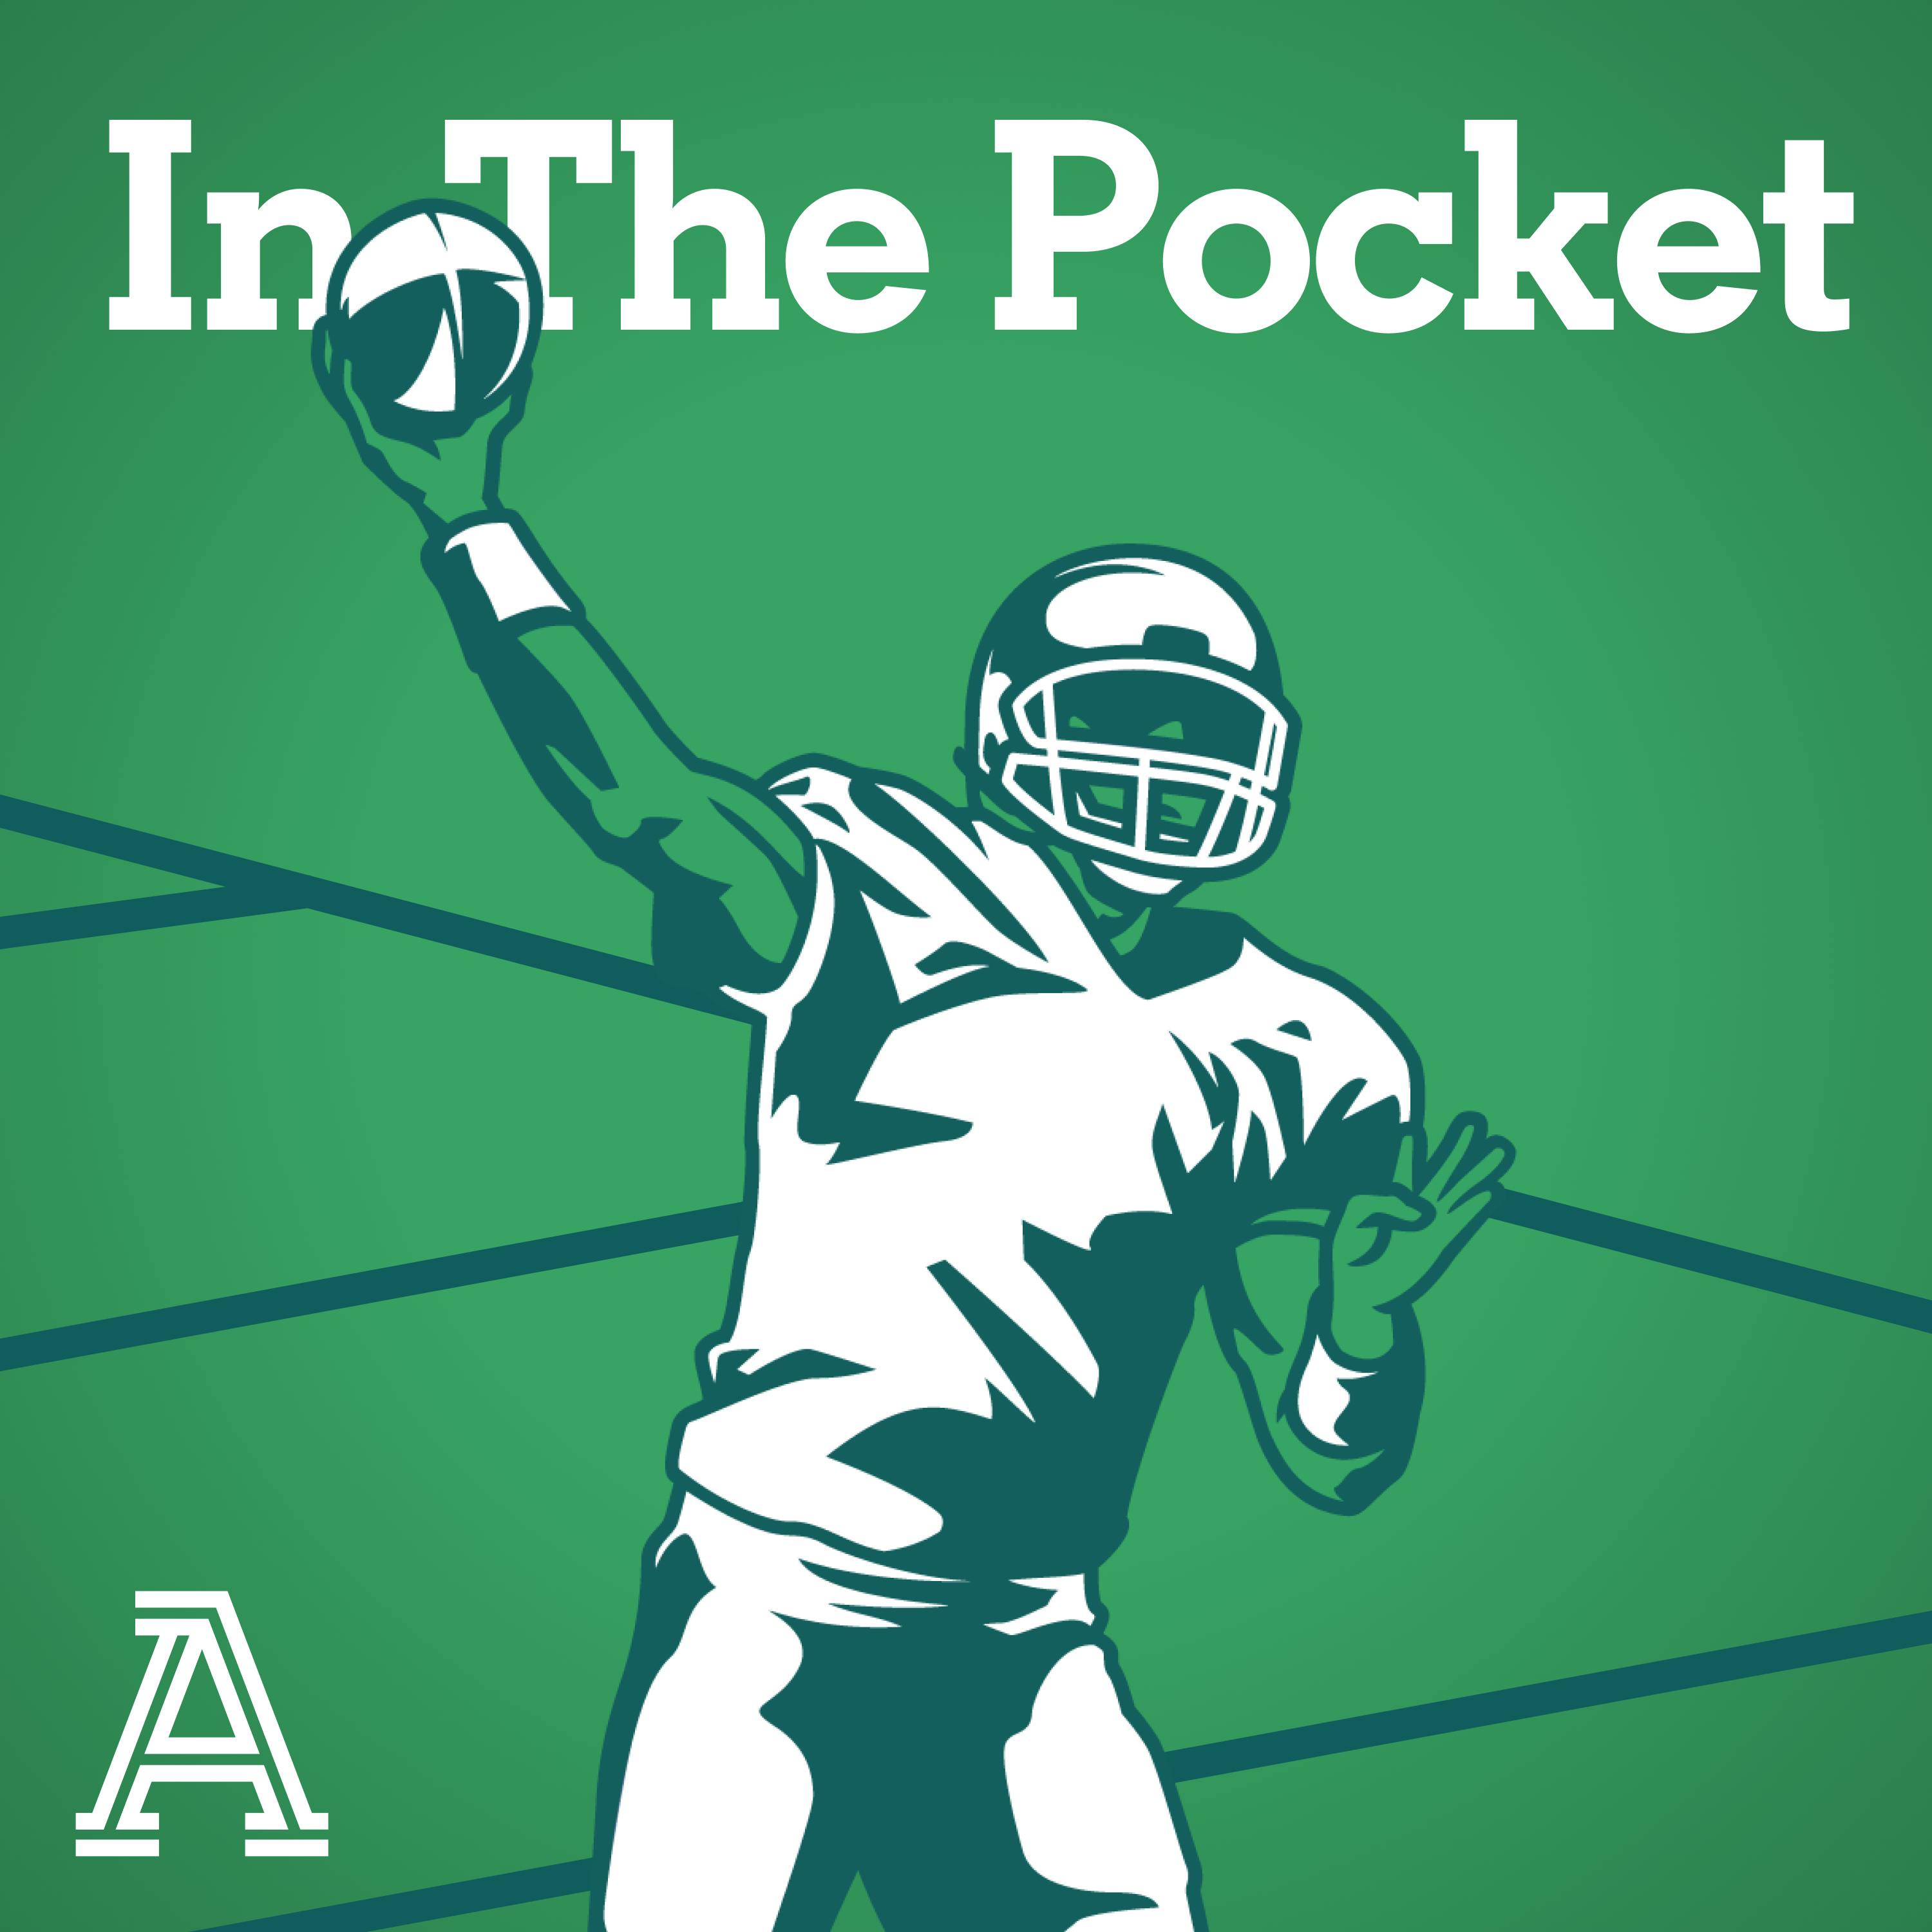 In The Pocket: The player’s perspective on the franchise tag and free agency, and Chase Daniel’s take on the 2024 QB class